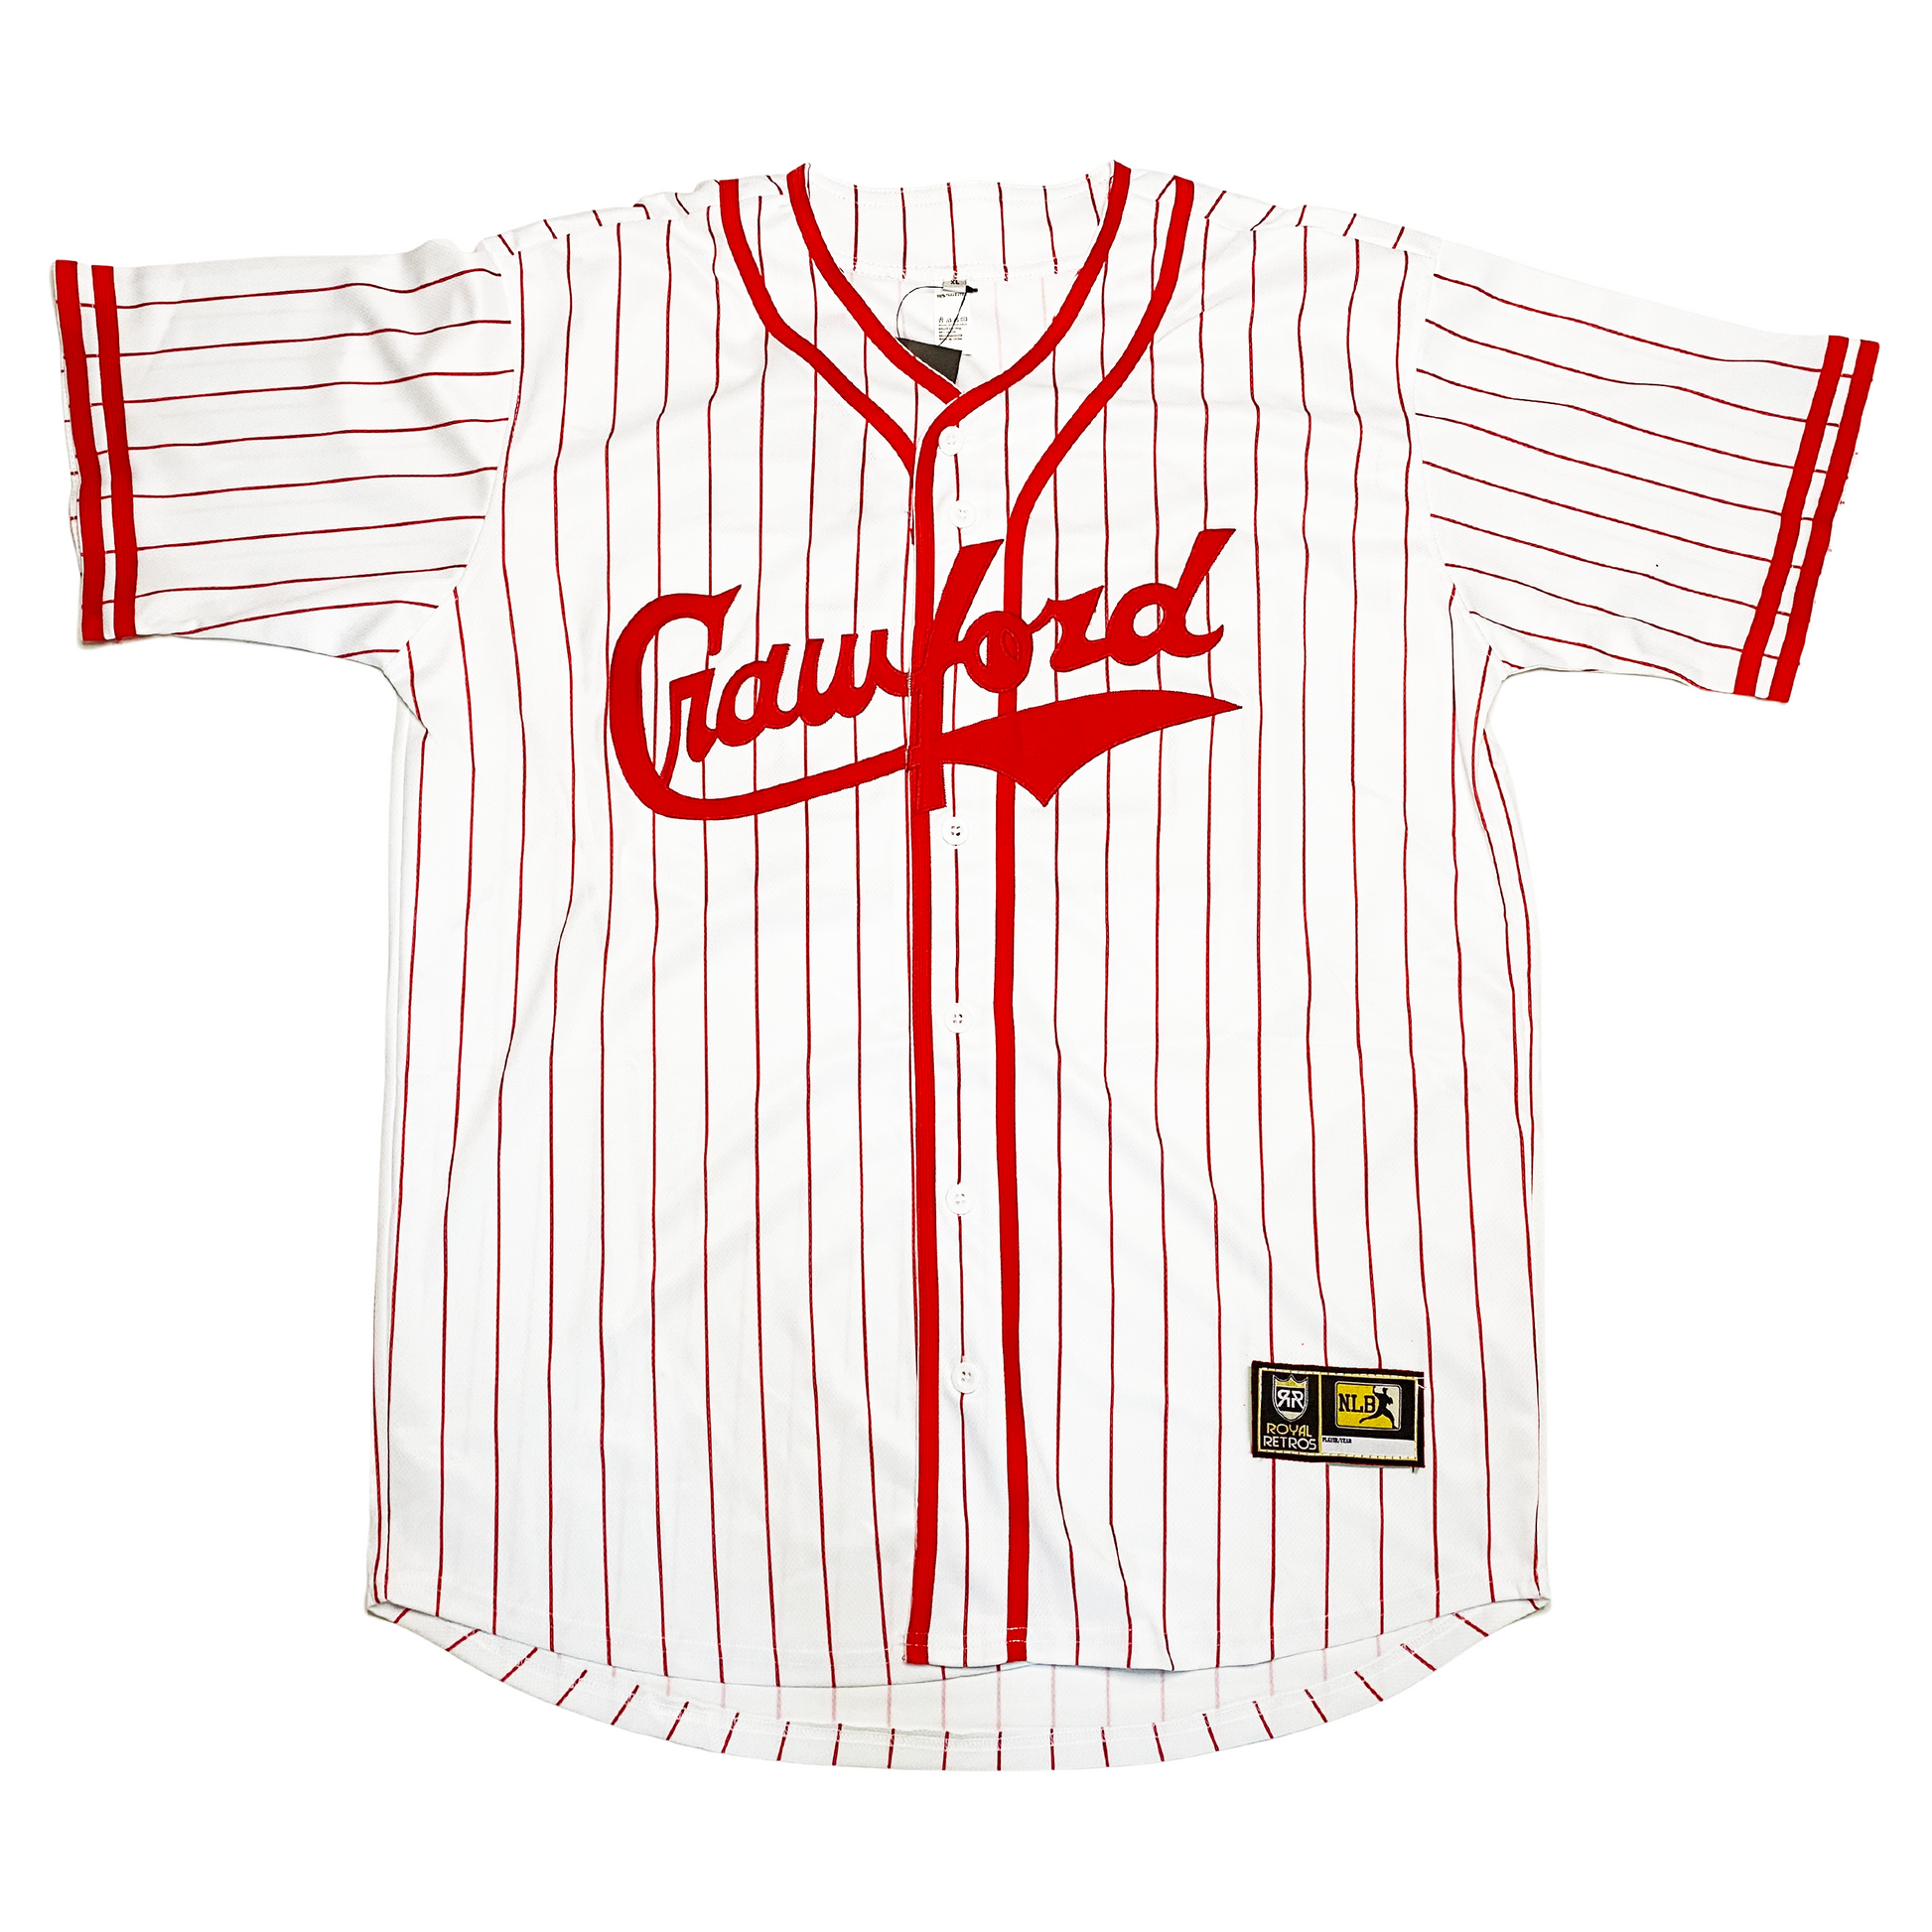 pittsburgh crawfords negro league jersey